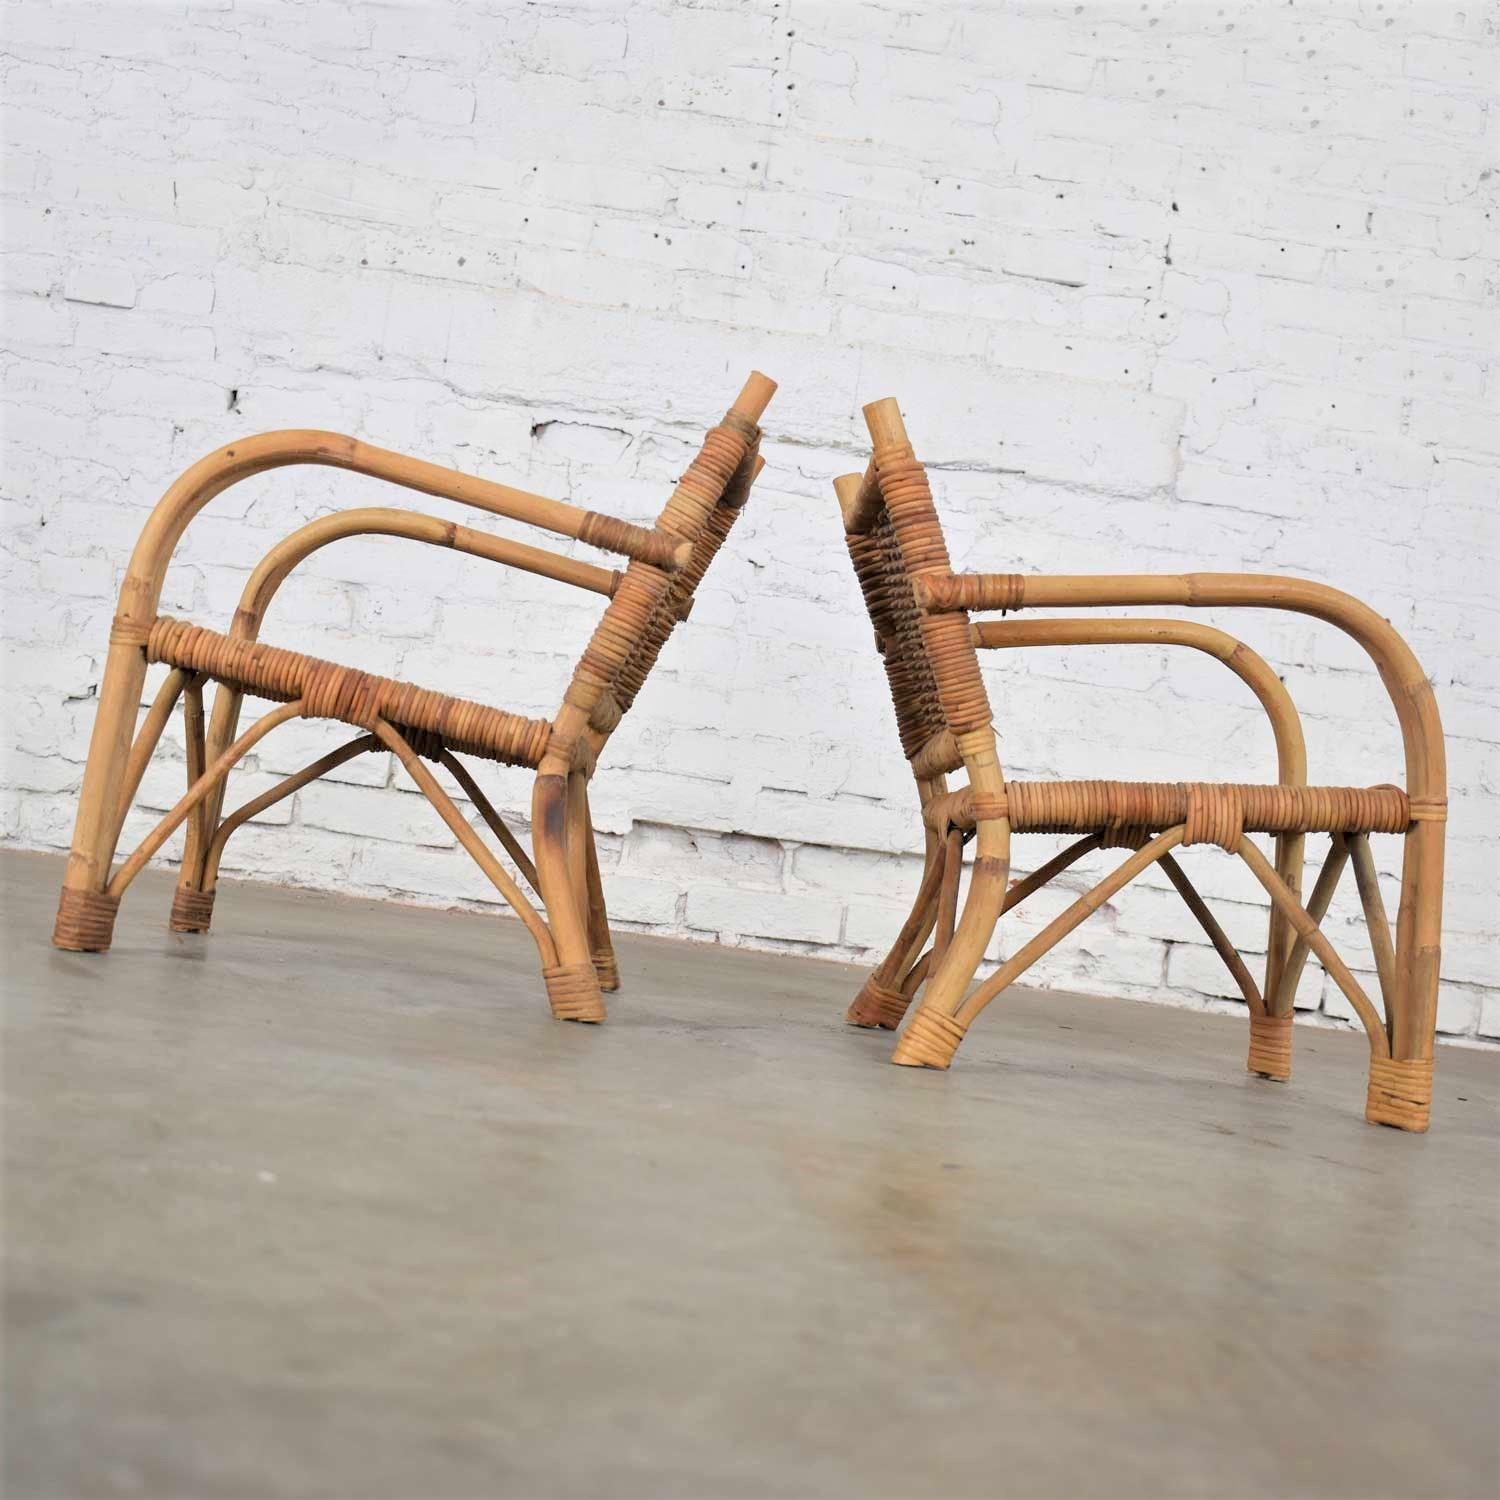 20th Century Children’s Rattan and Wicker Chairs with Bent Arms Vintage Pair, 1930-1960